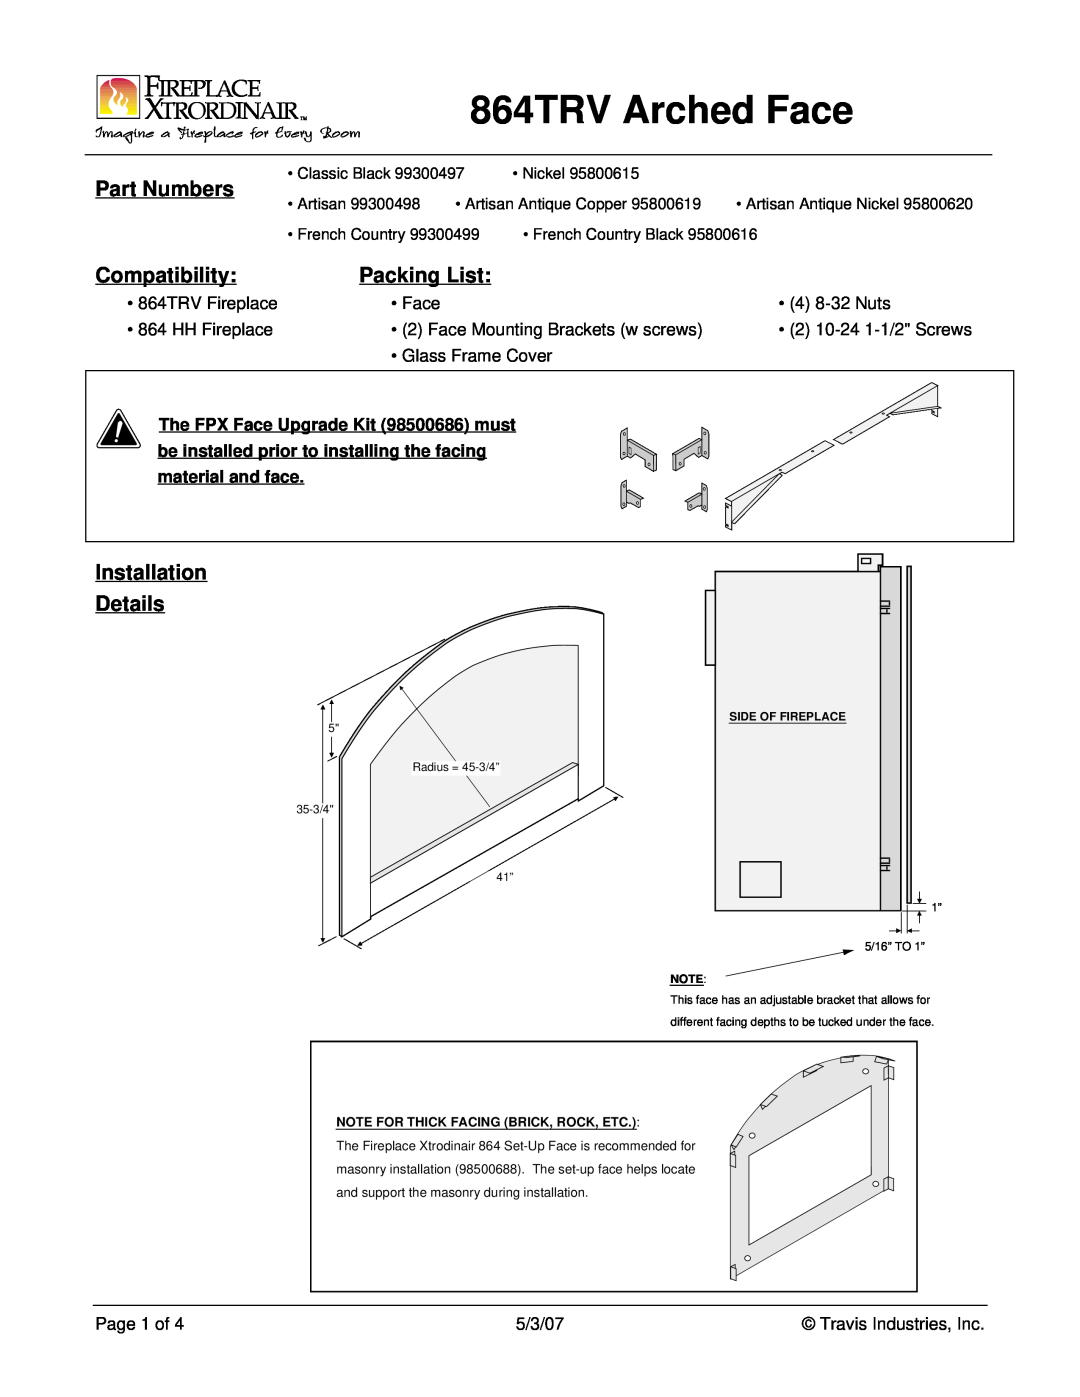 FireplaceXtrordinair manual 864TRV Arched Face, Part Numbers, Compatibility, Packing List, Installation Details 